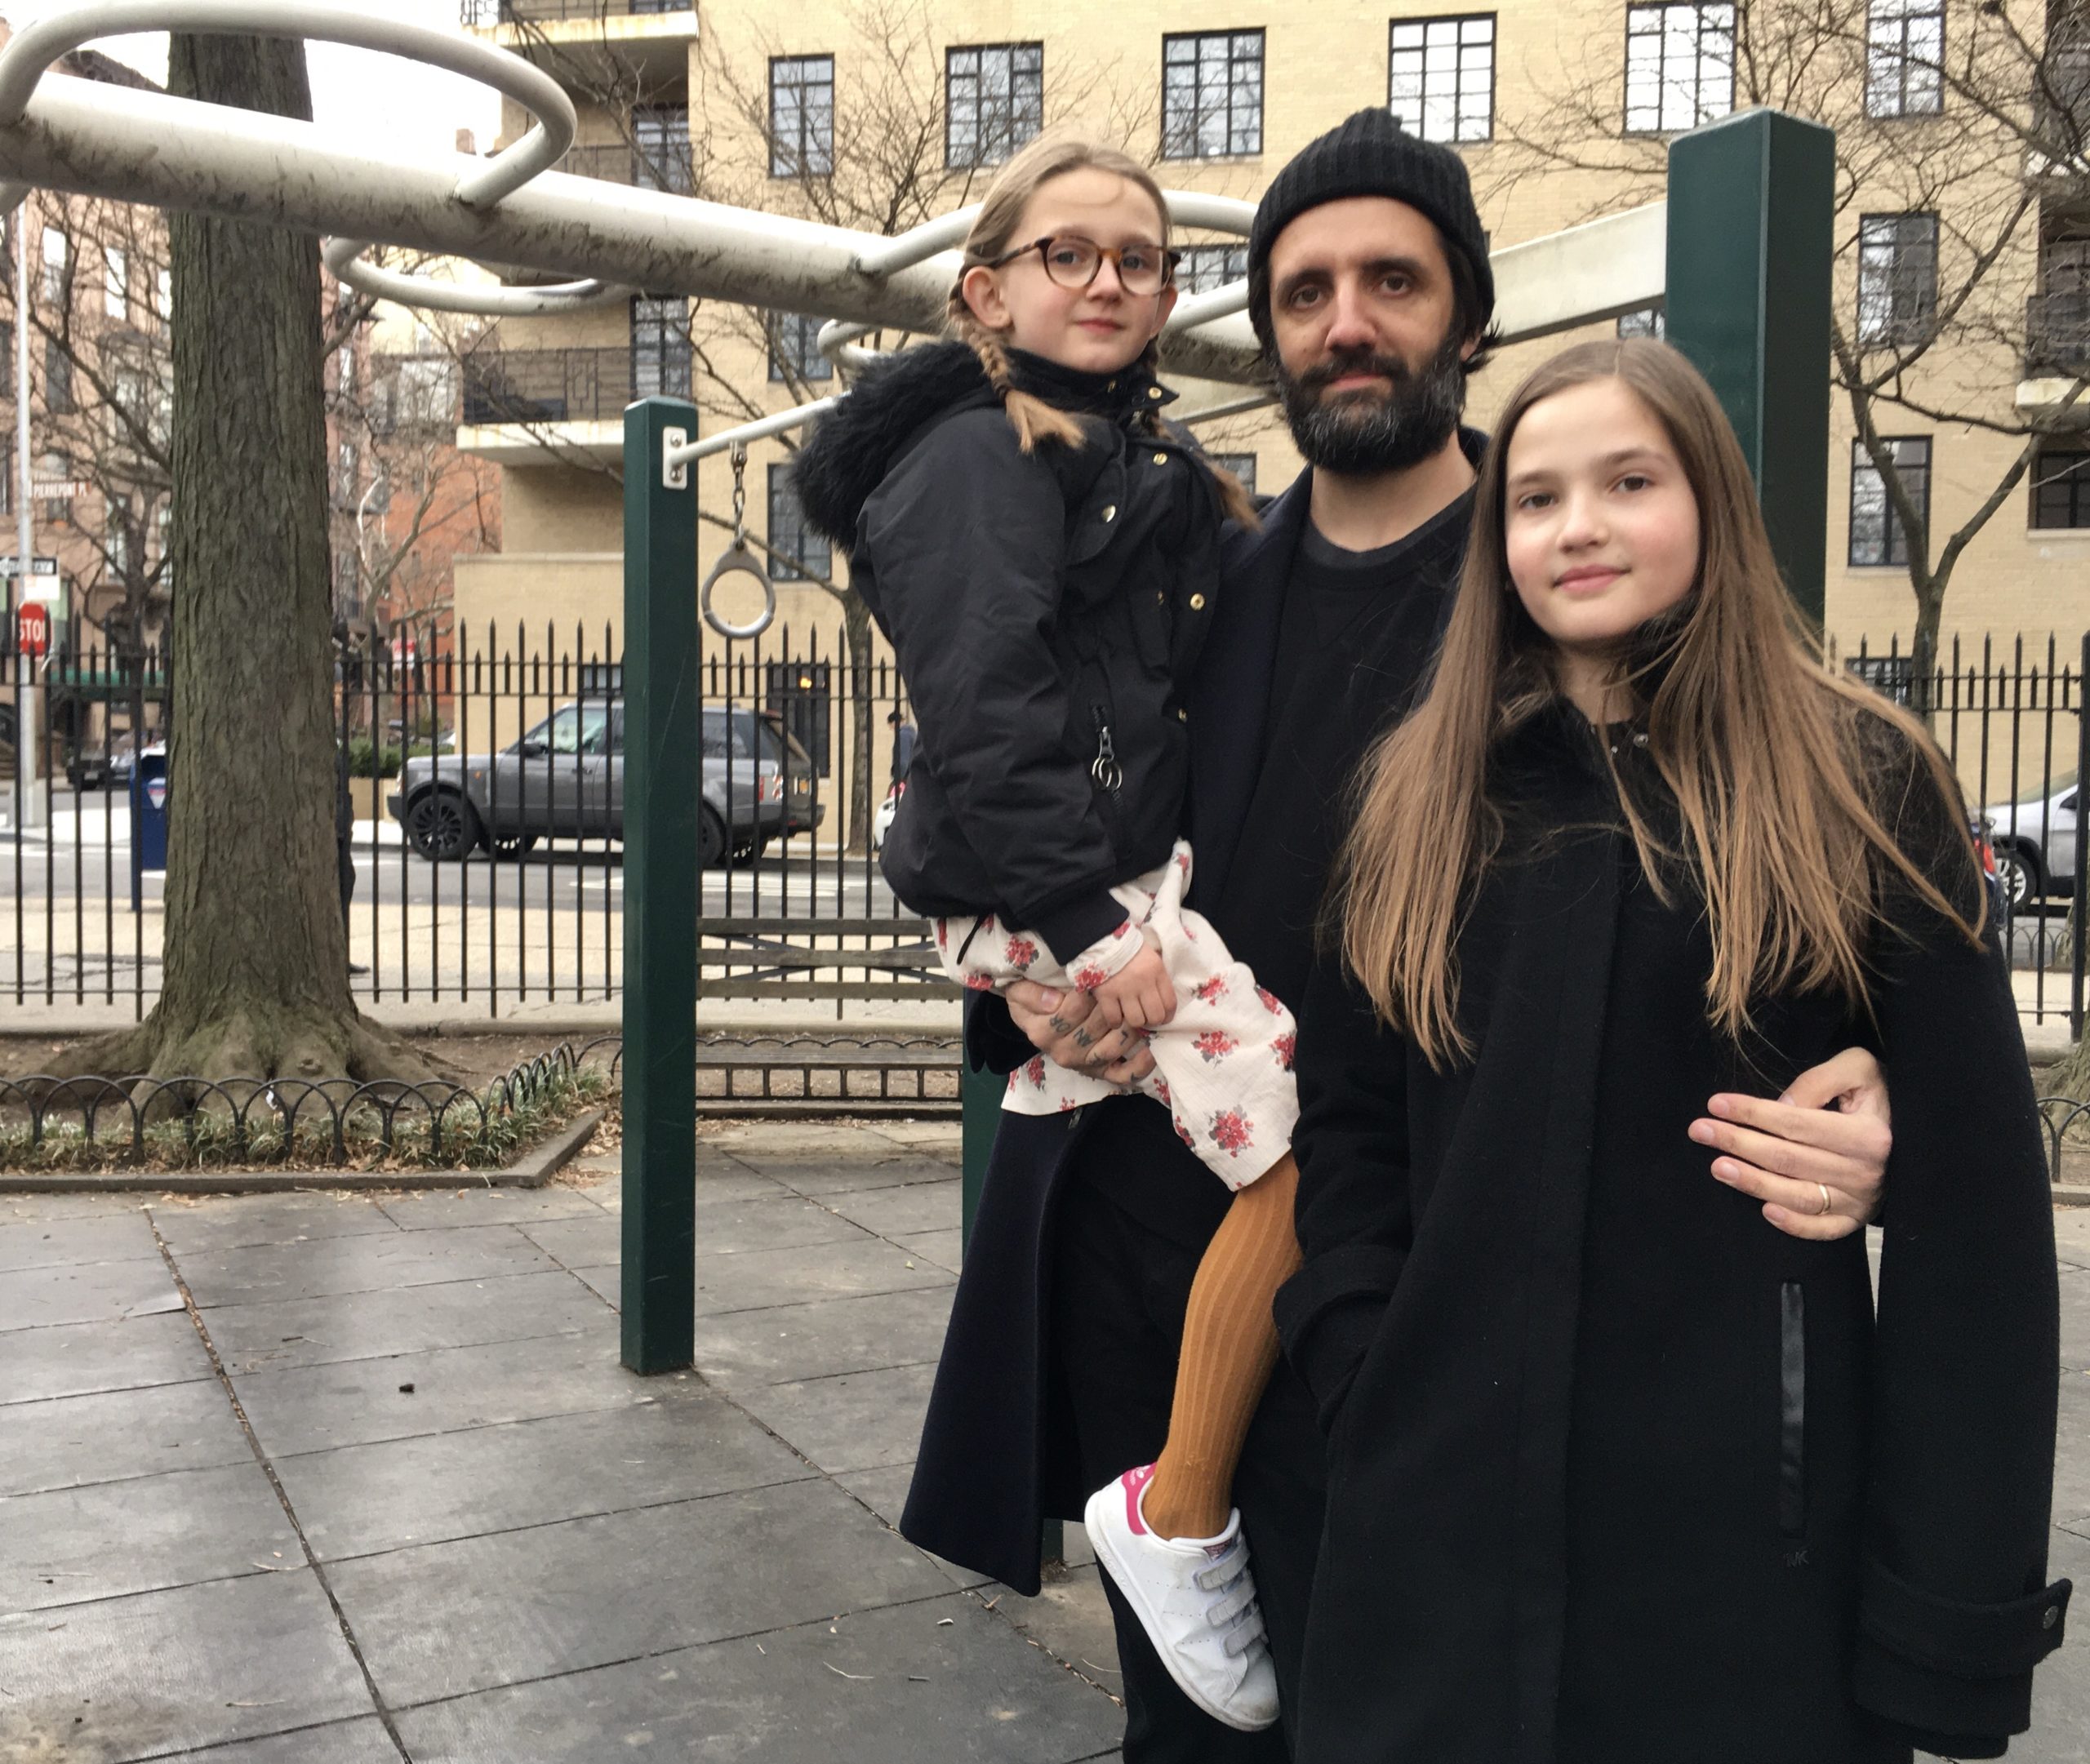 Sacha Maric, with daughters Alma (at left) and Eleanor (at right), is glad the Promenade won’t be torn down. Photo: Lore Croghan/Brooklyn Eagle